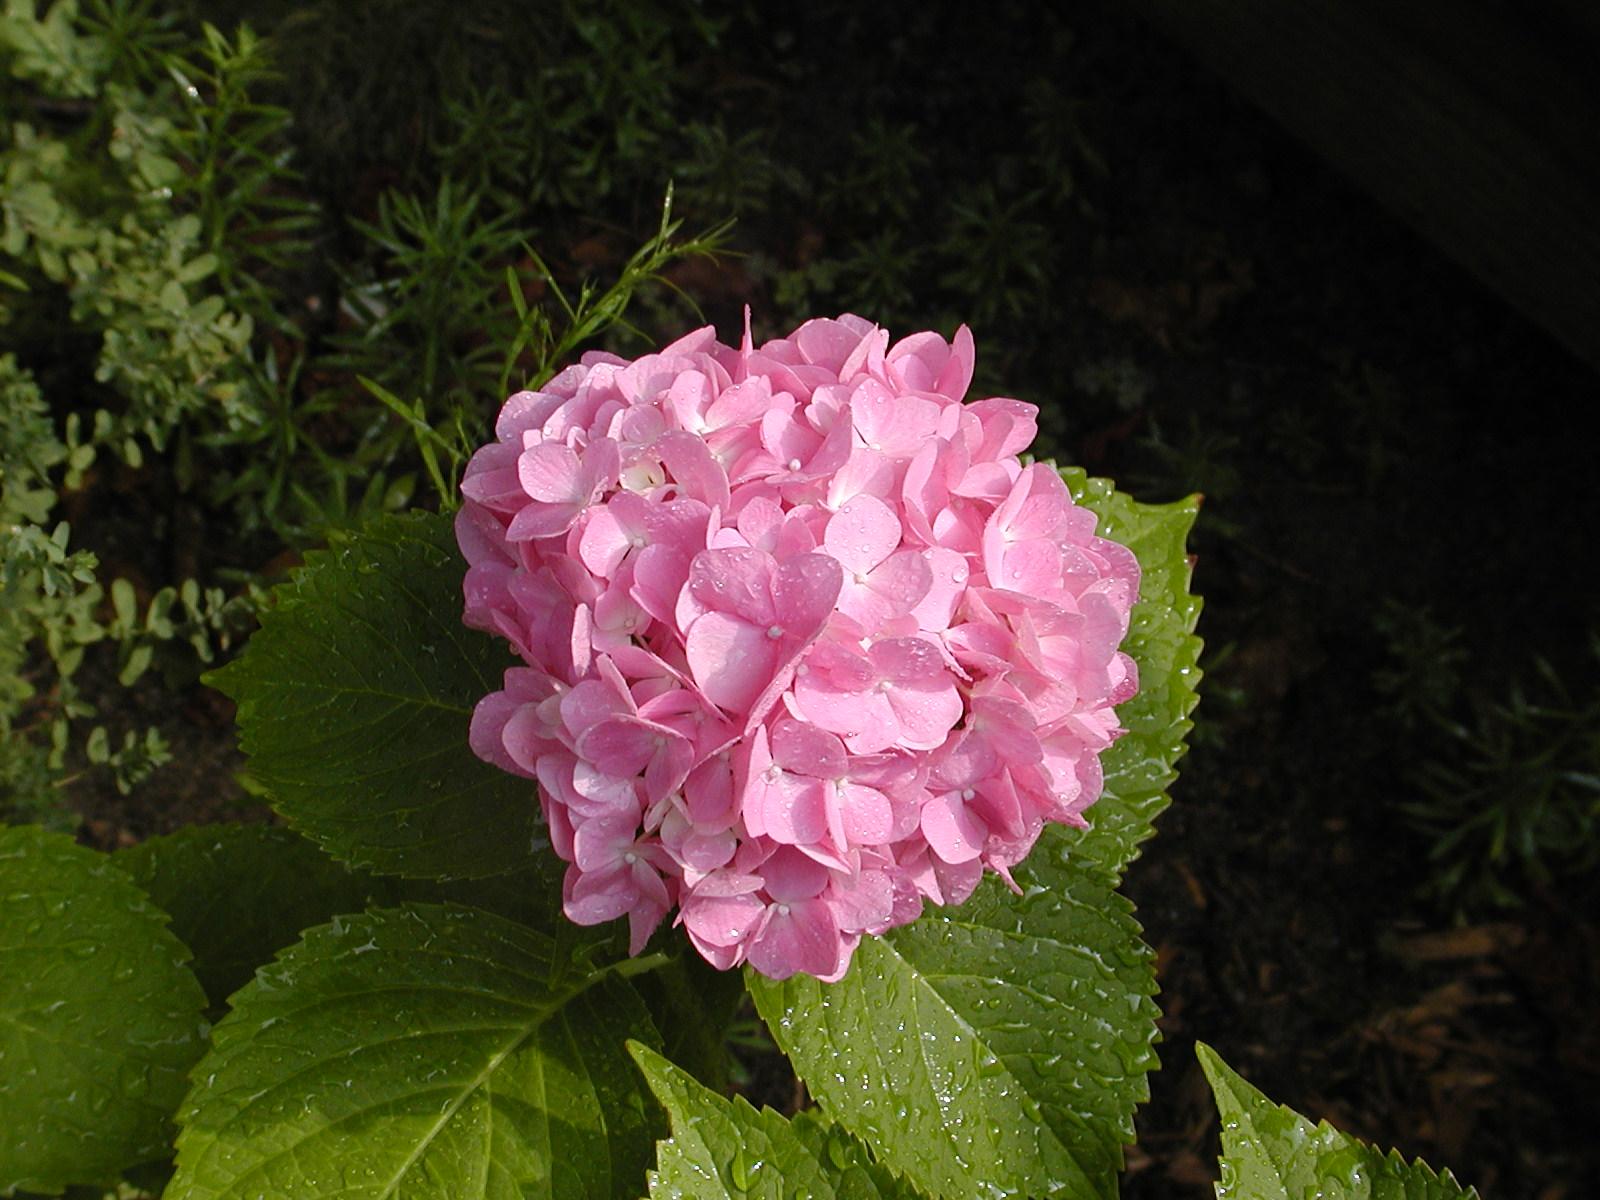 Summer Hydrangea (user submitted)